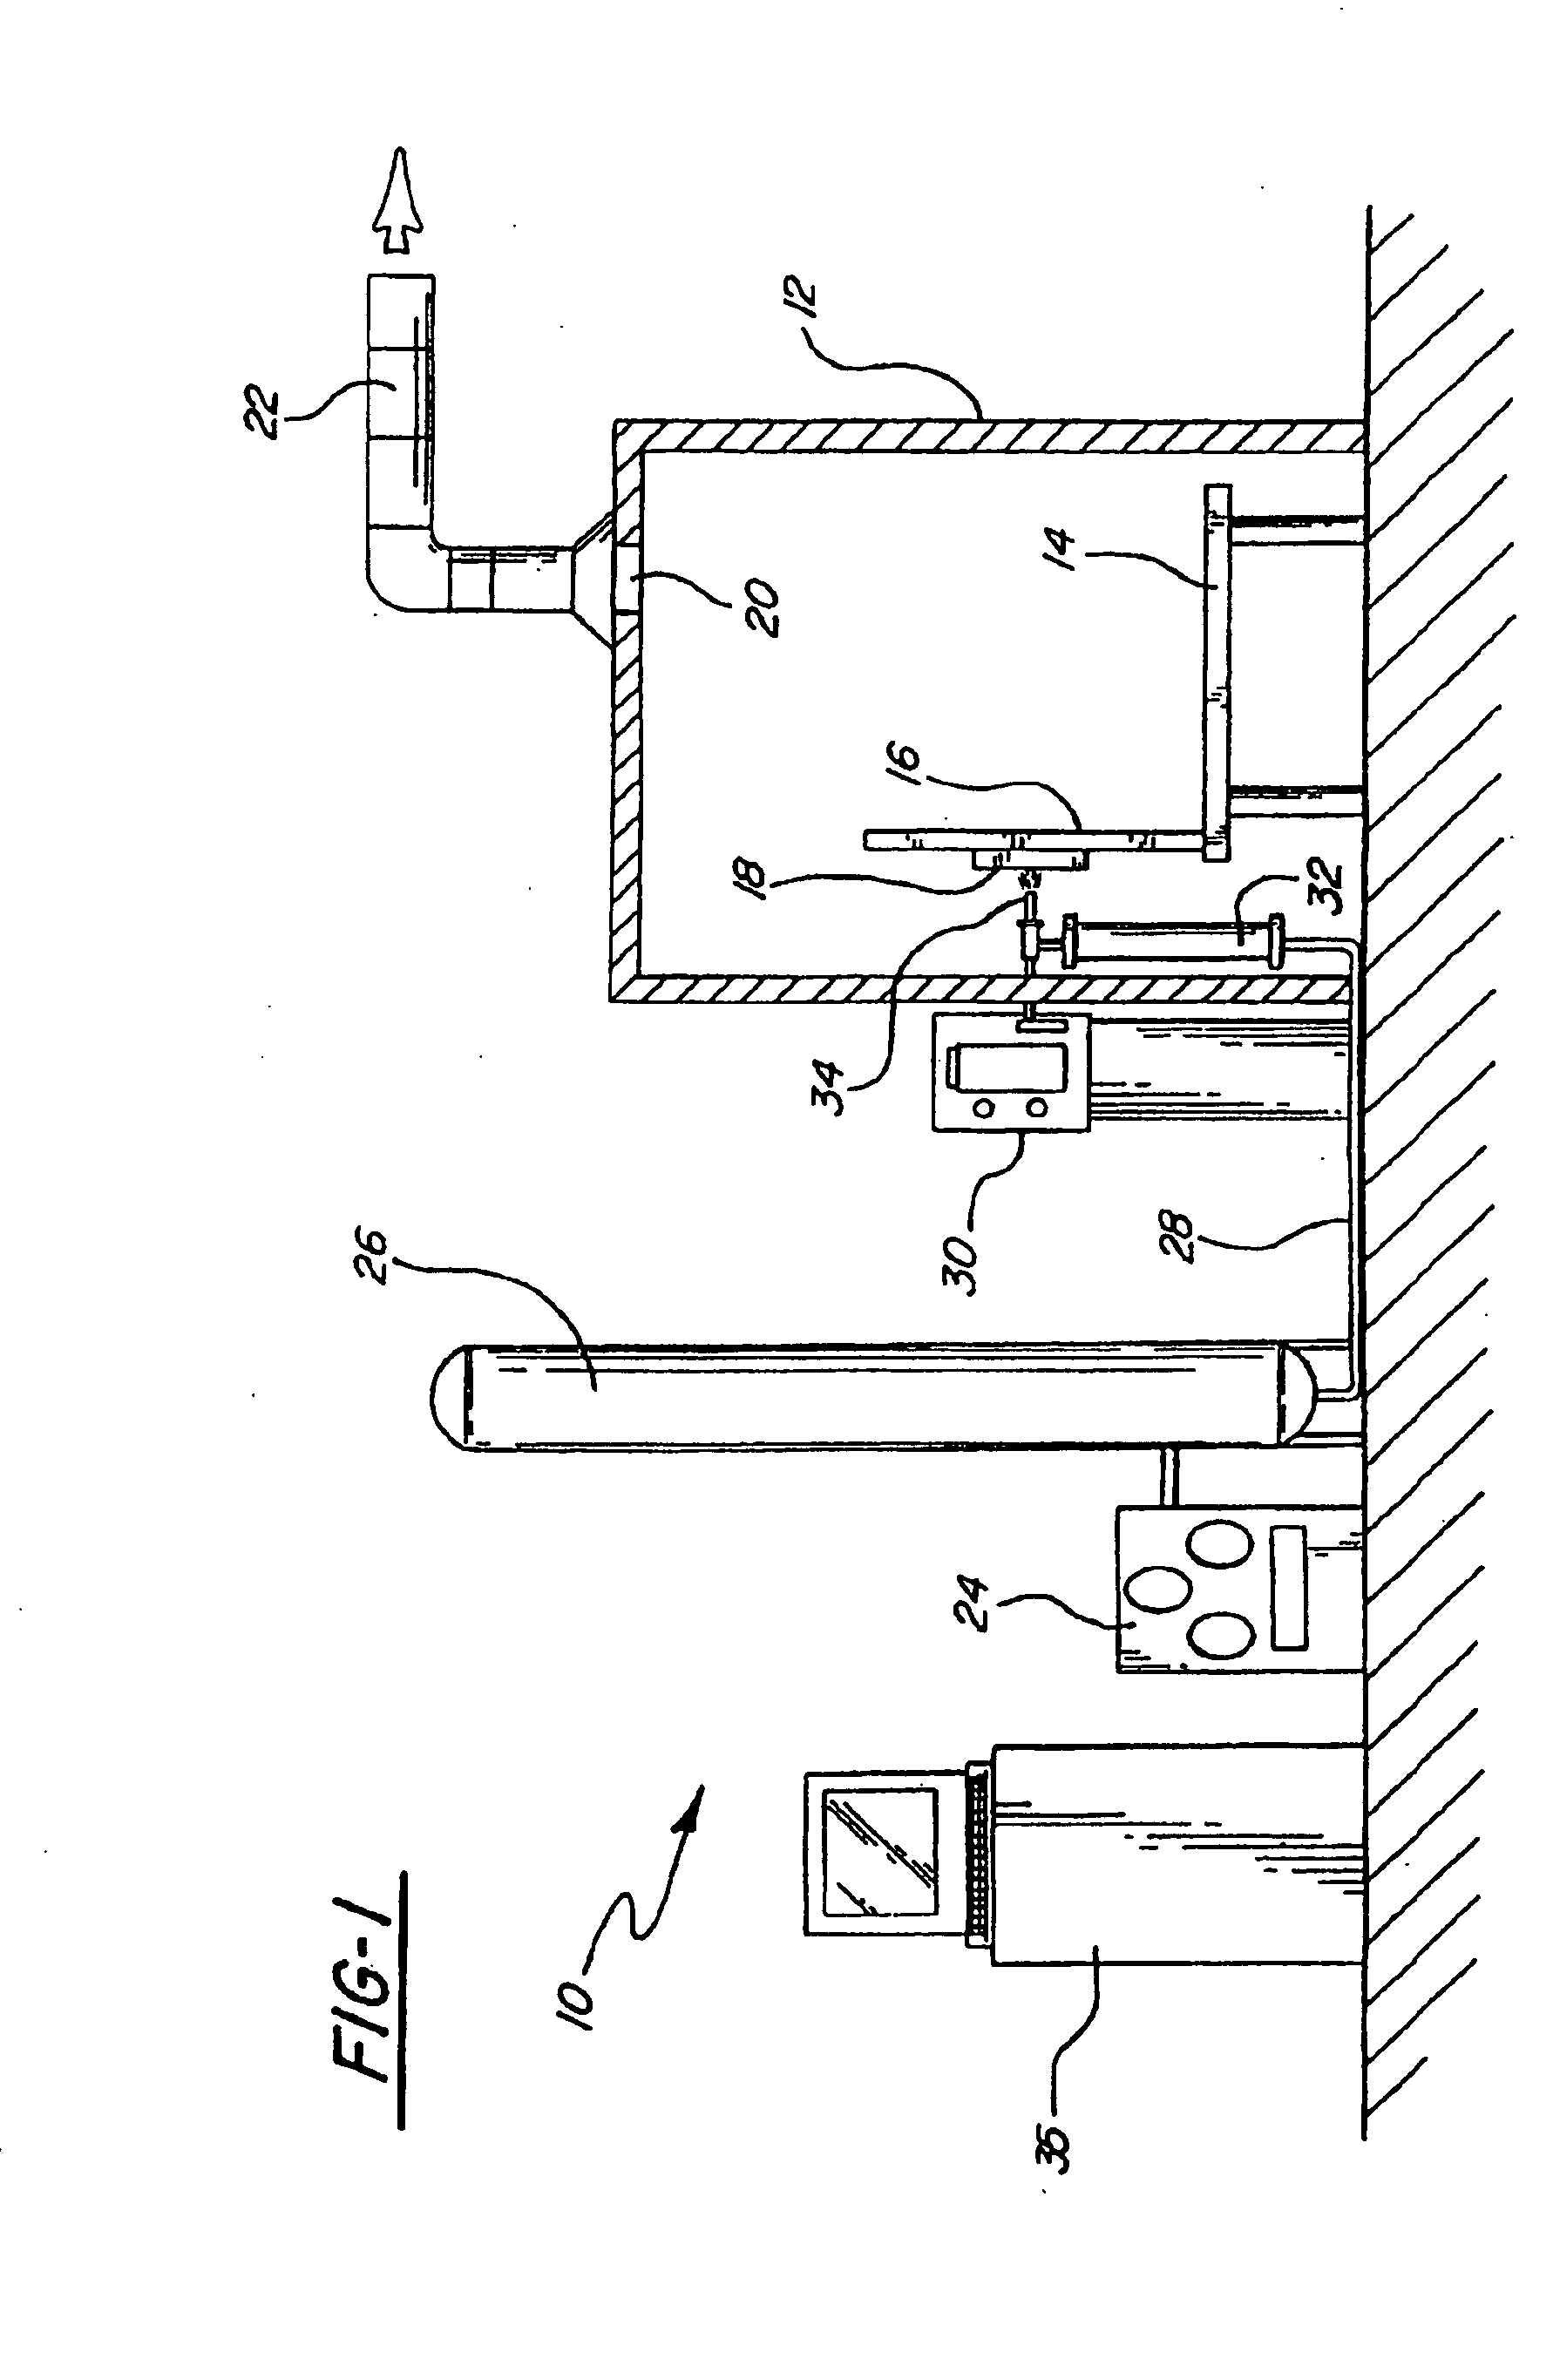 Modified high efficiency kinetic spray nozzle